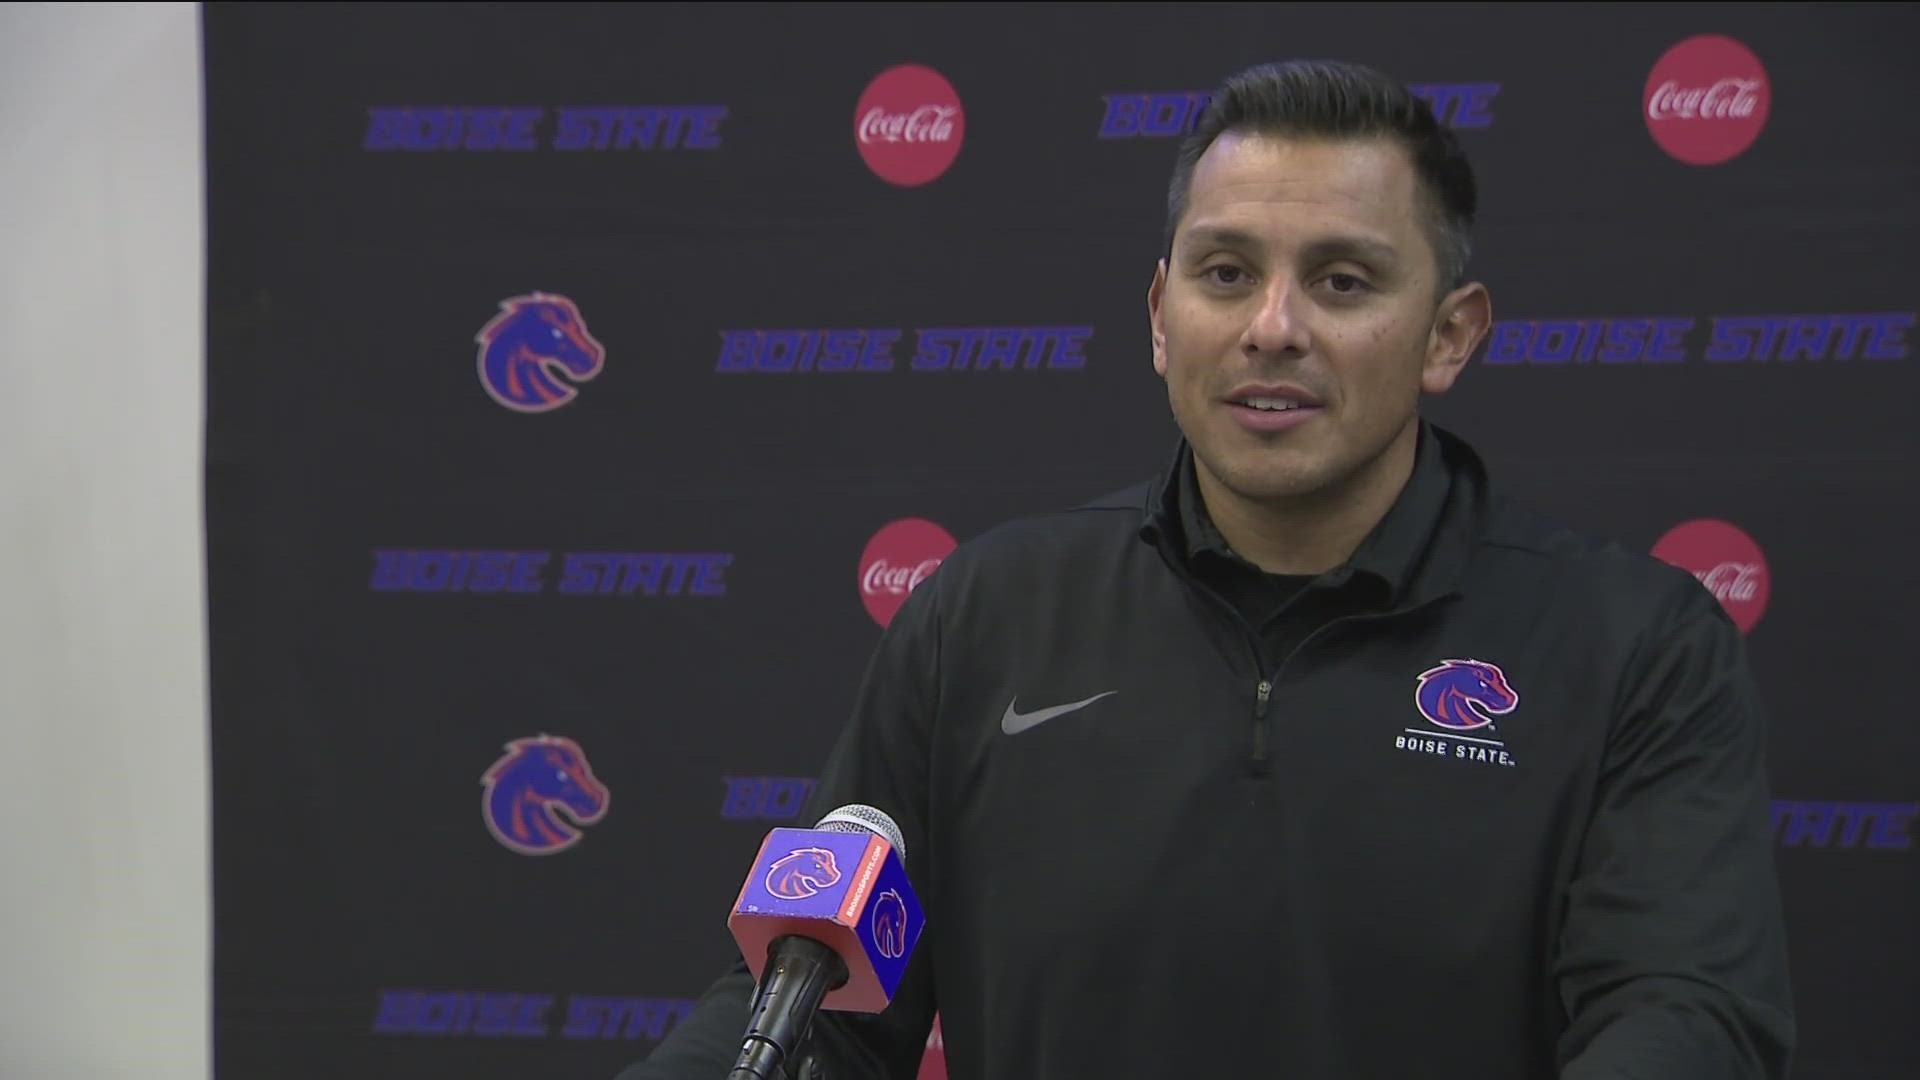 After signing 22 players last December, the Broncos added an additional 12 athletes Wednesday. Six of Boise State's latest signees are Idaho natives.